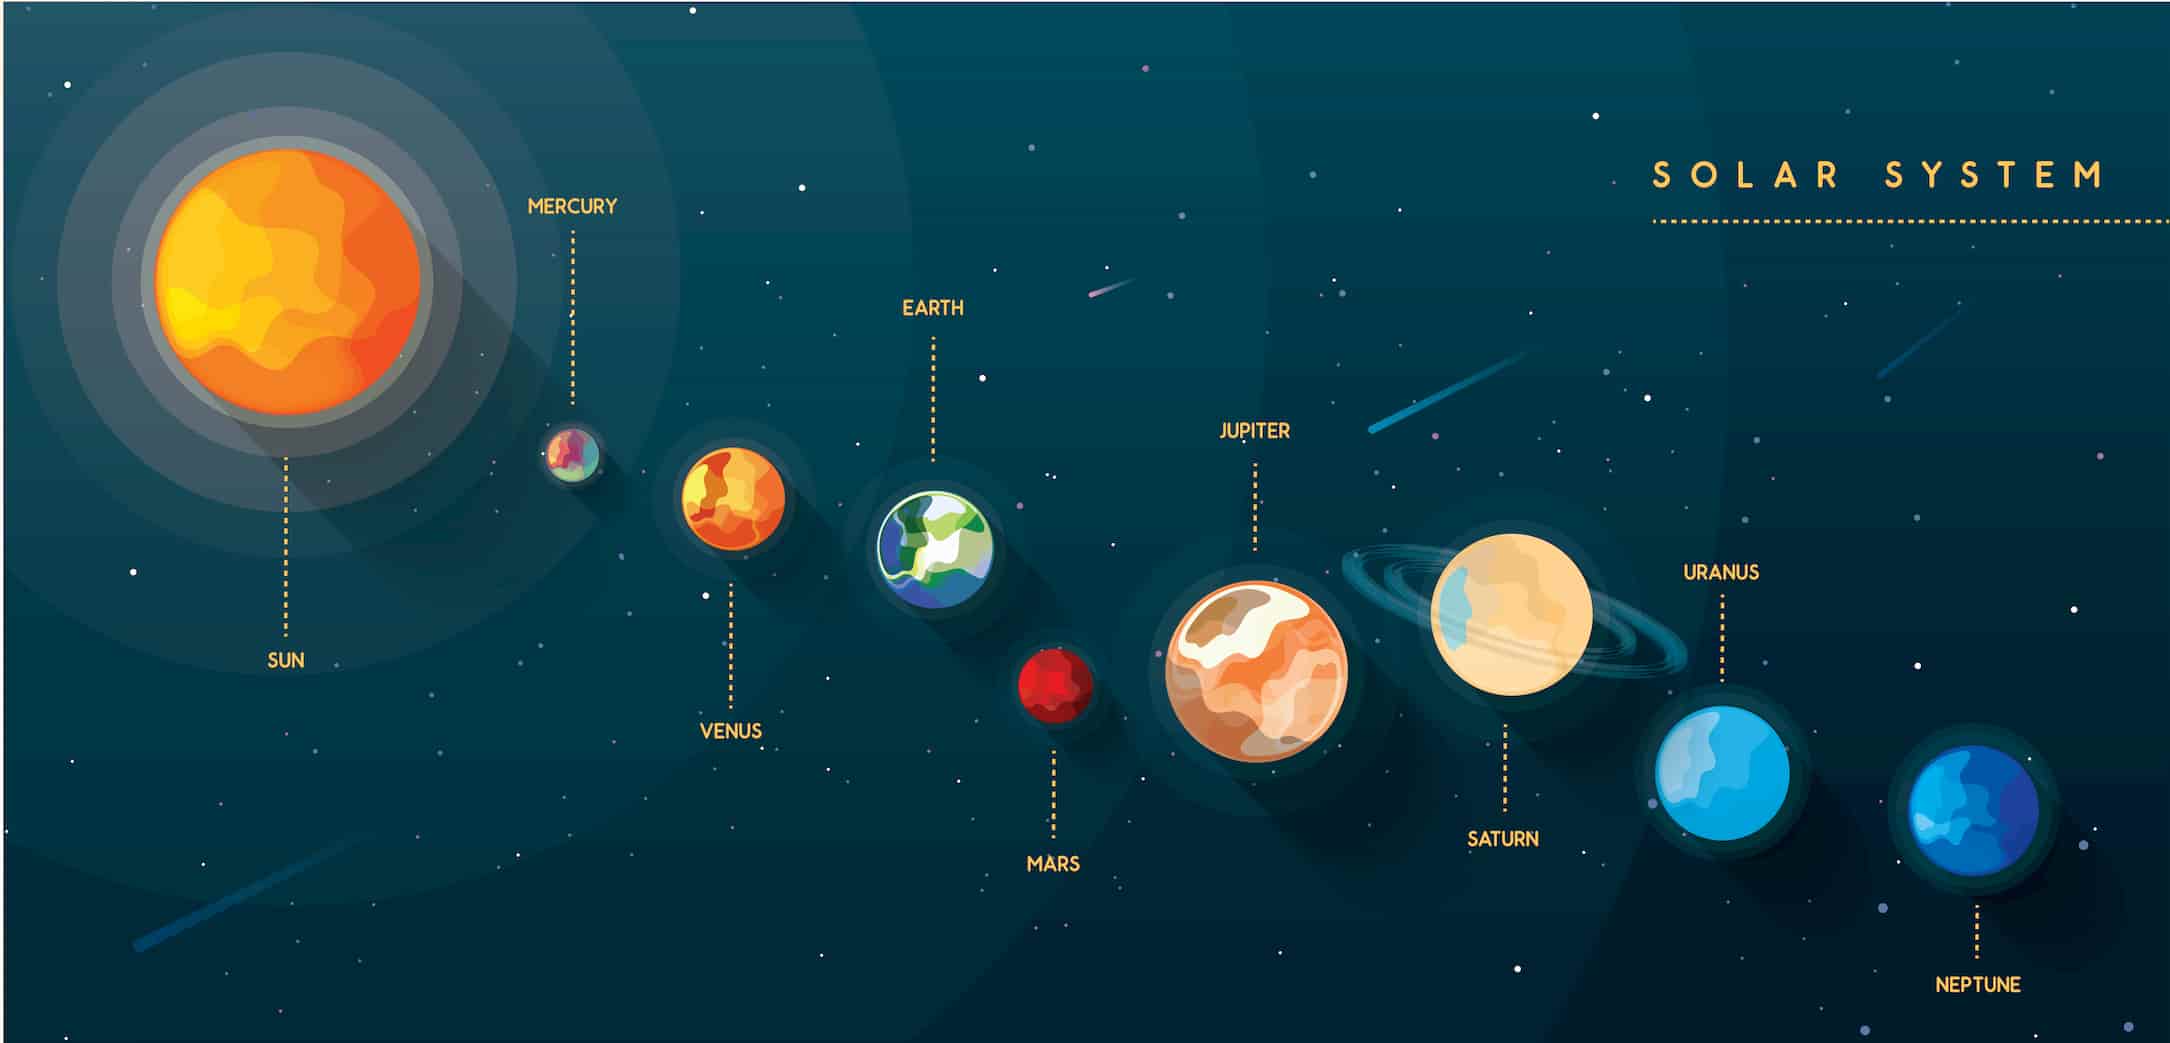 The planets in order from the Sun